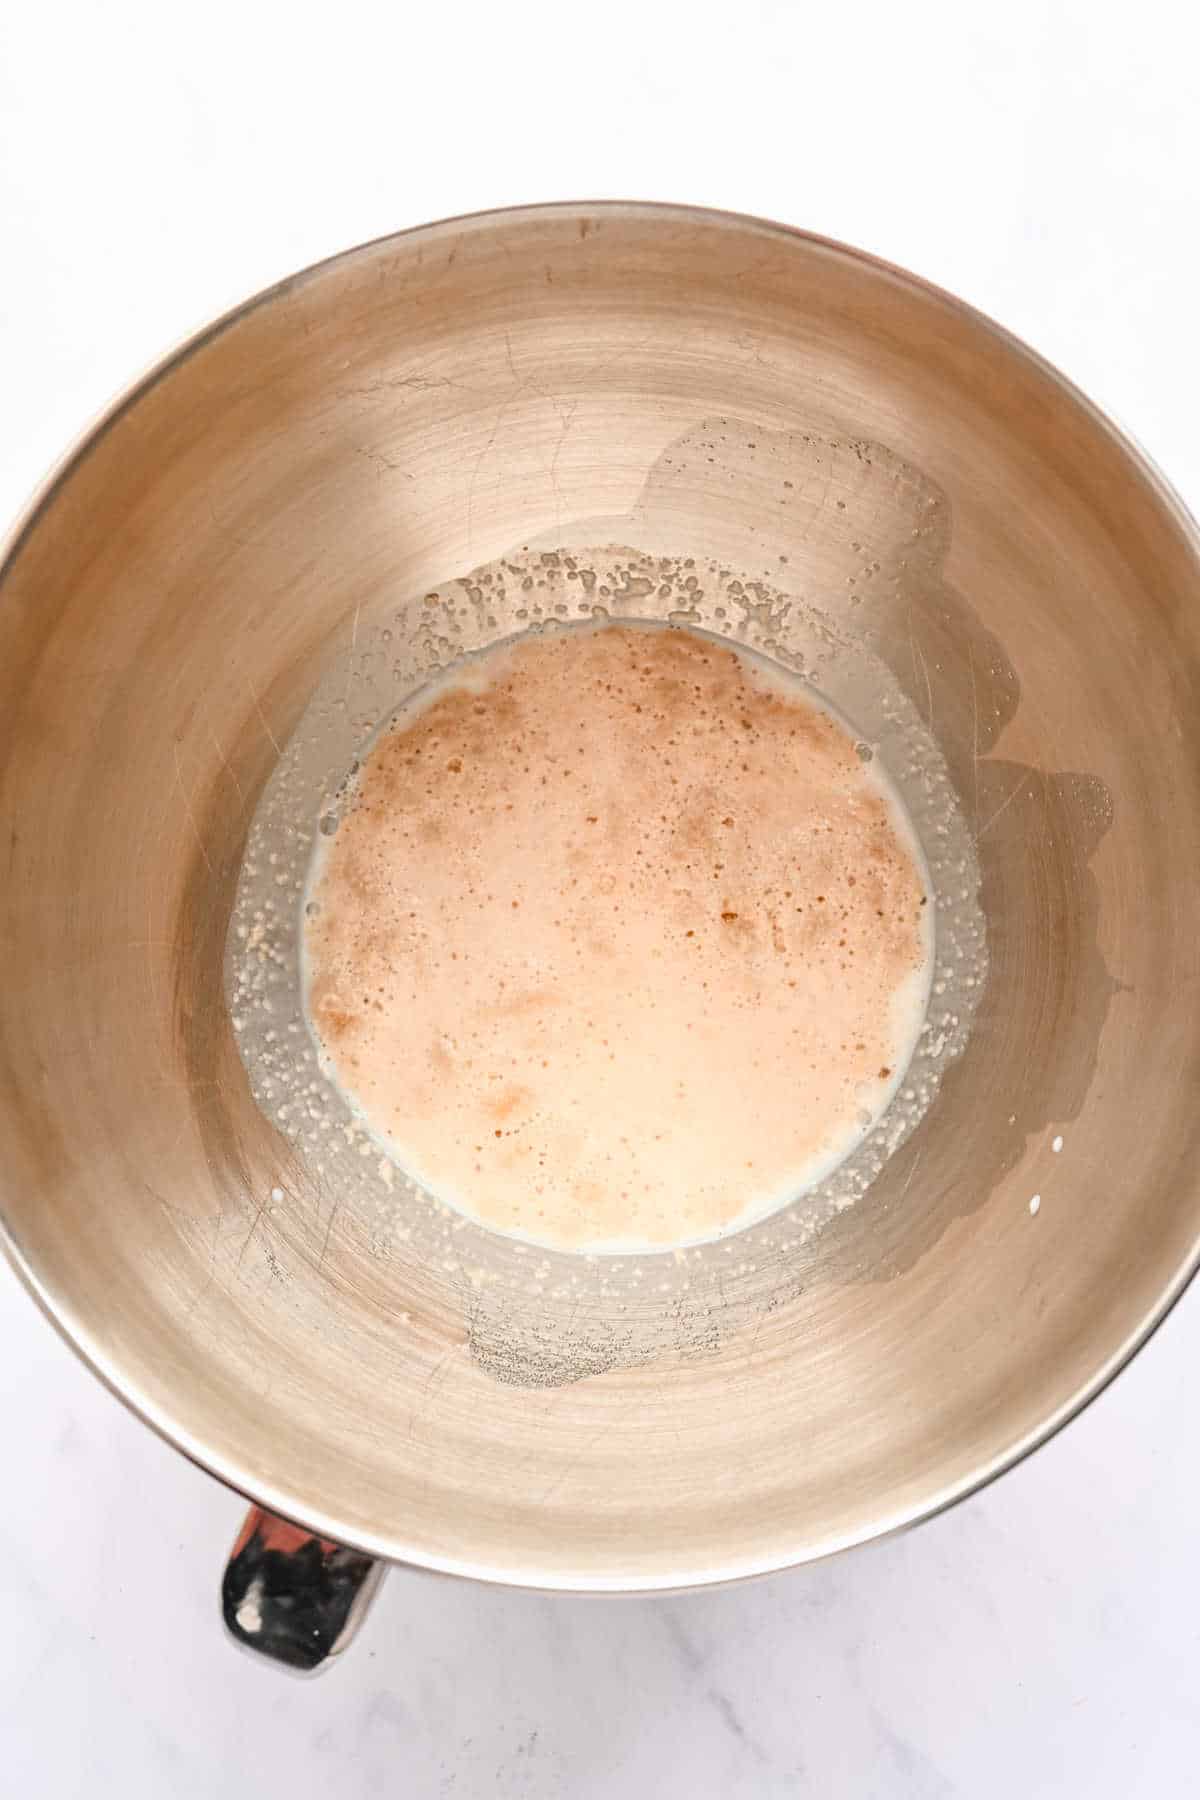 Yeast proofing in a silver mixing bowl.